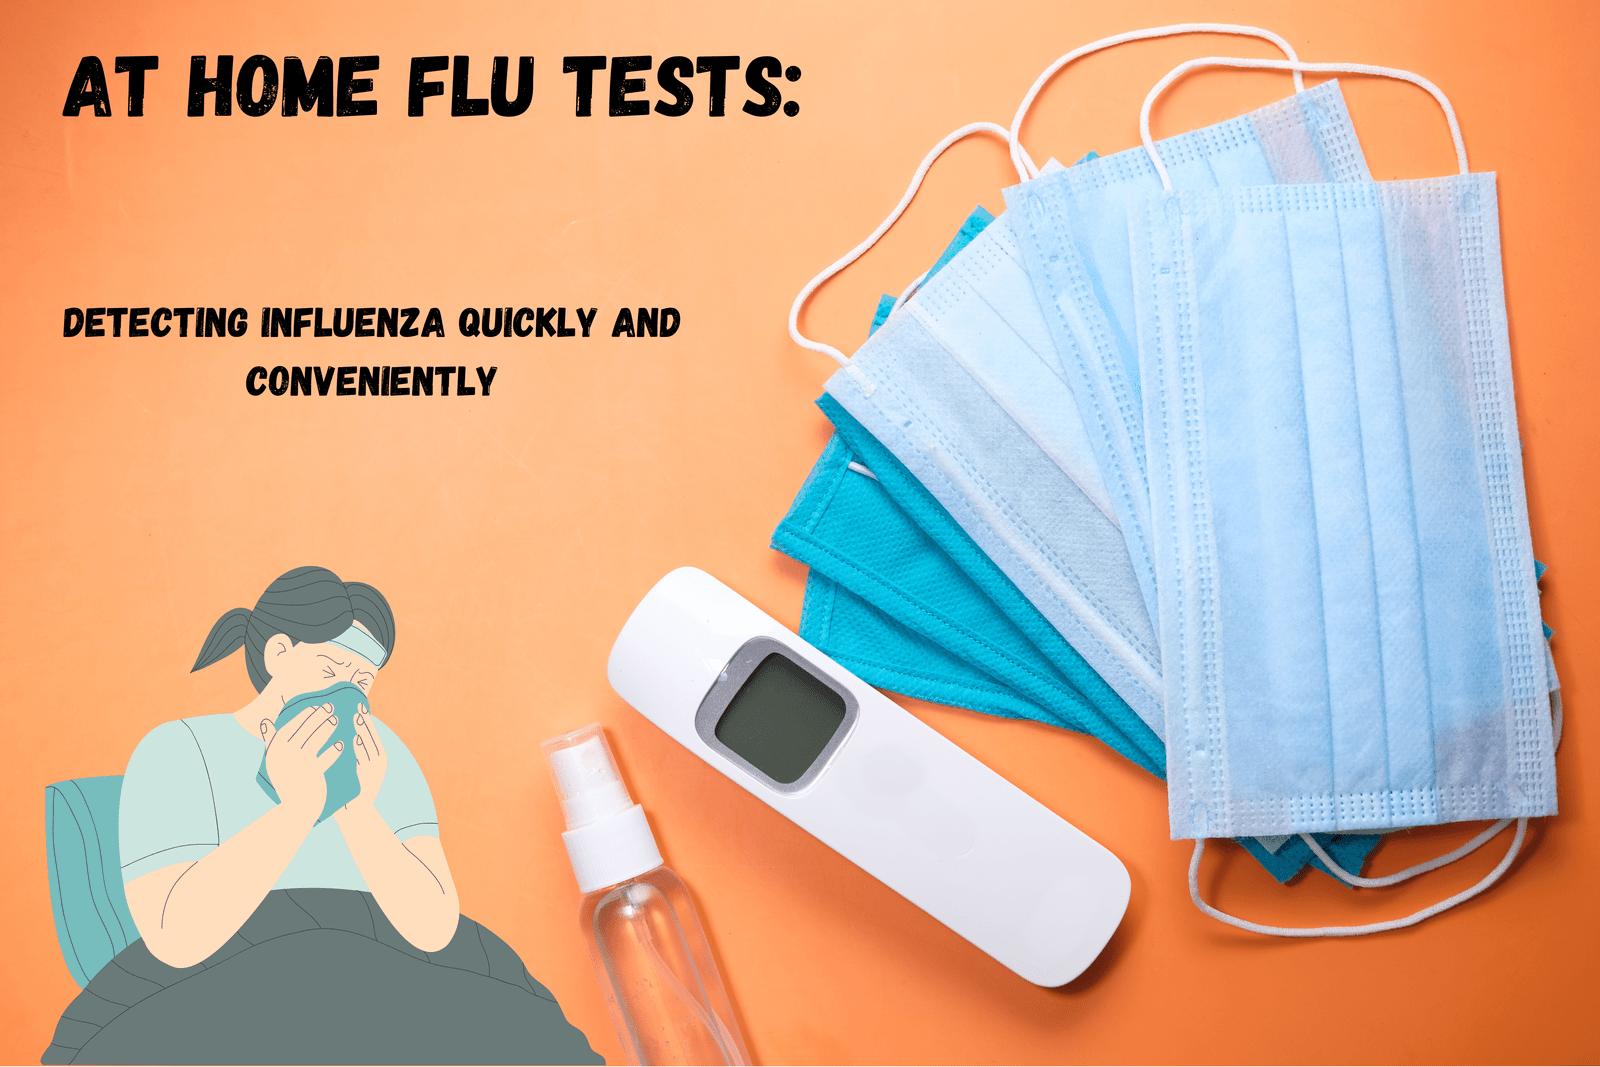 At Home Flu Tests